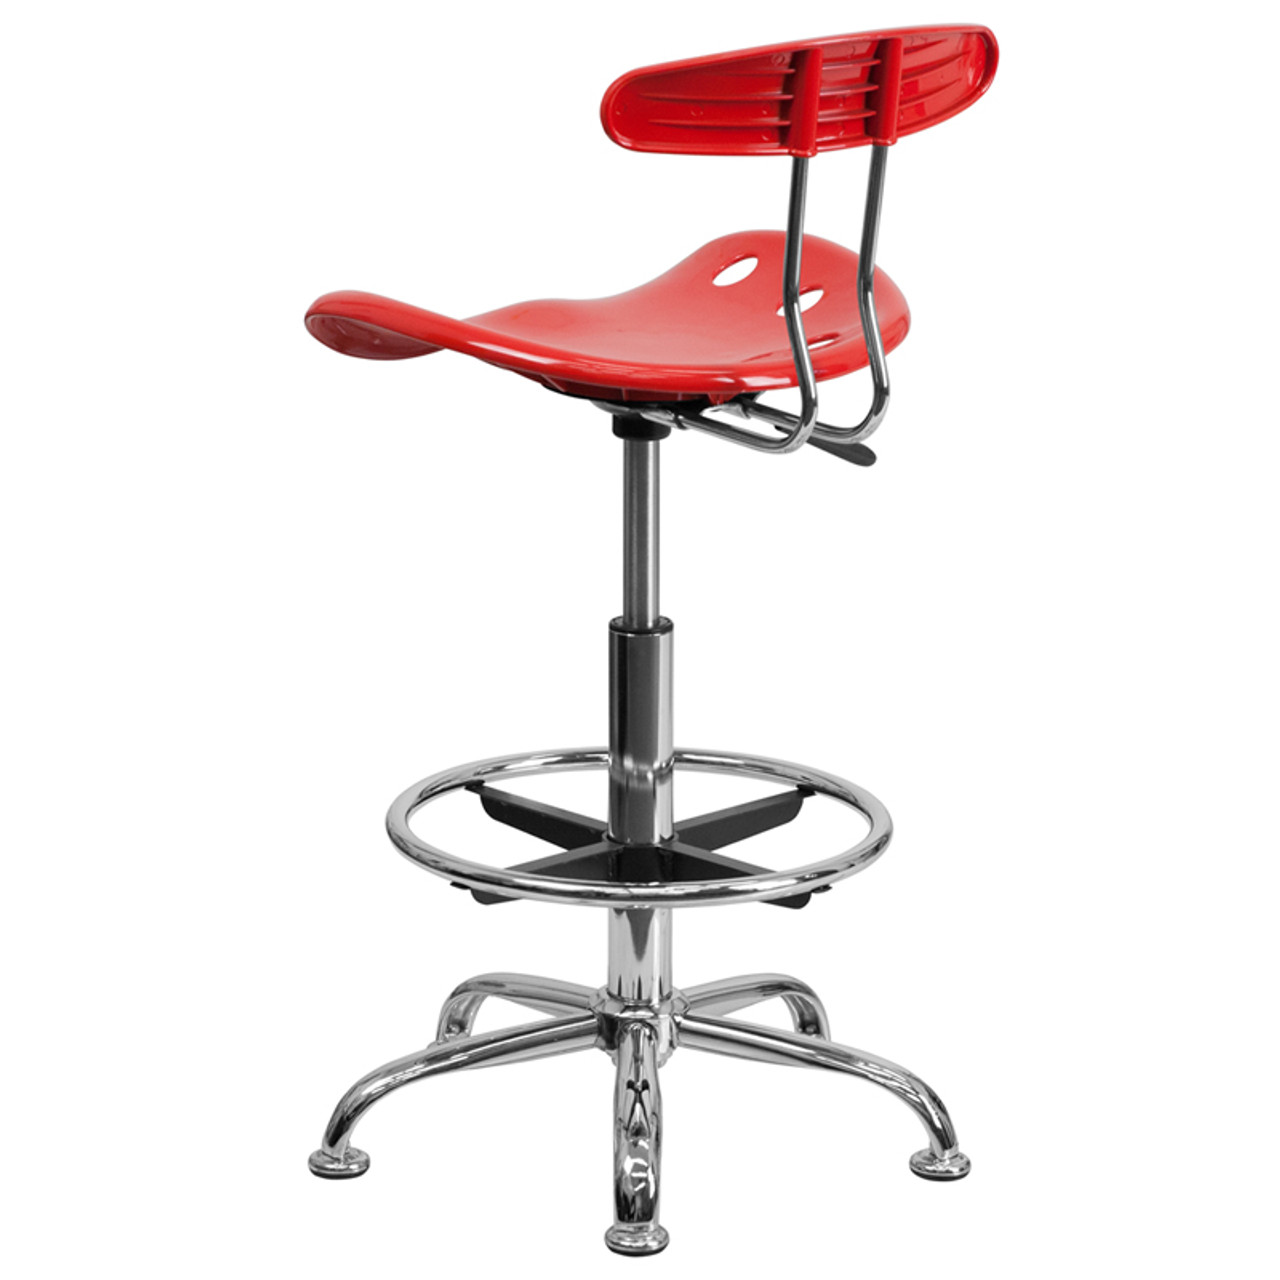 Vibrant Cherry Tomato and Chrome Drafting Stool with Tractor Seat , #FF-0563-14